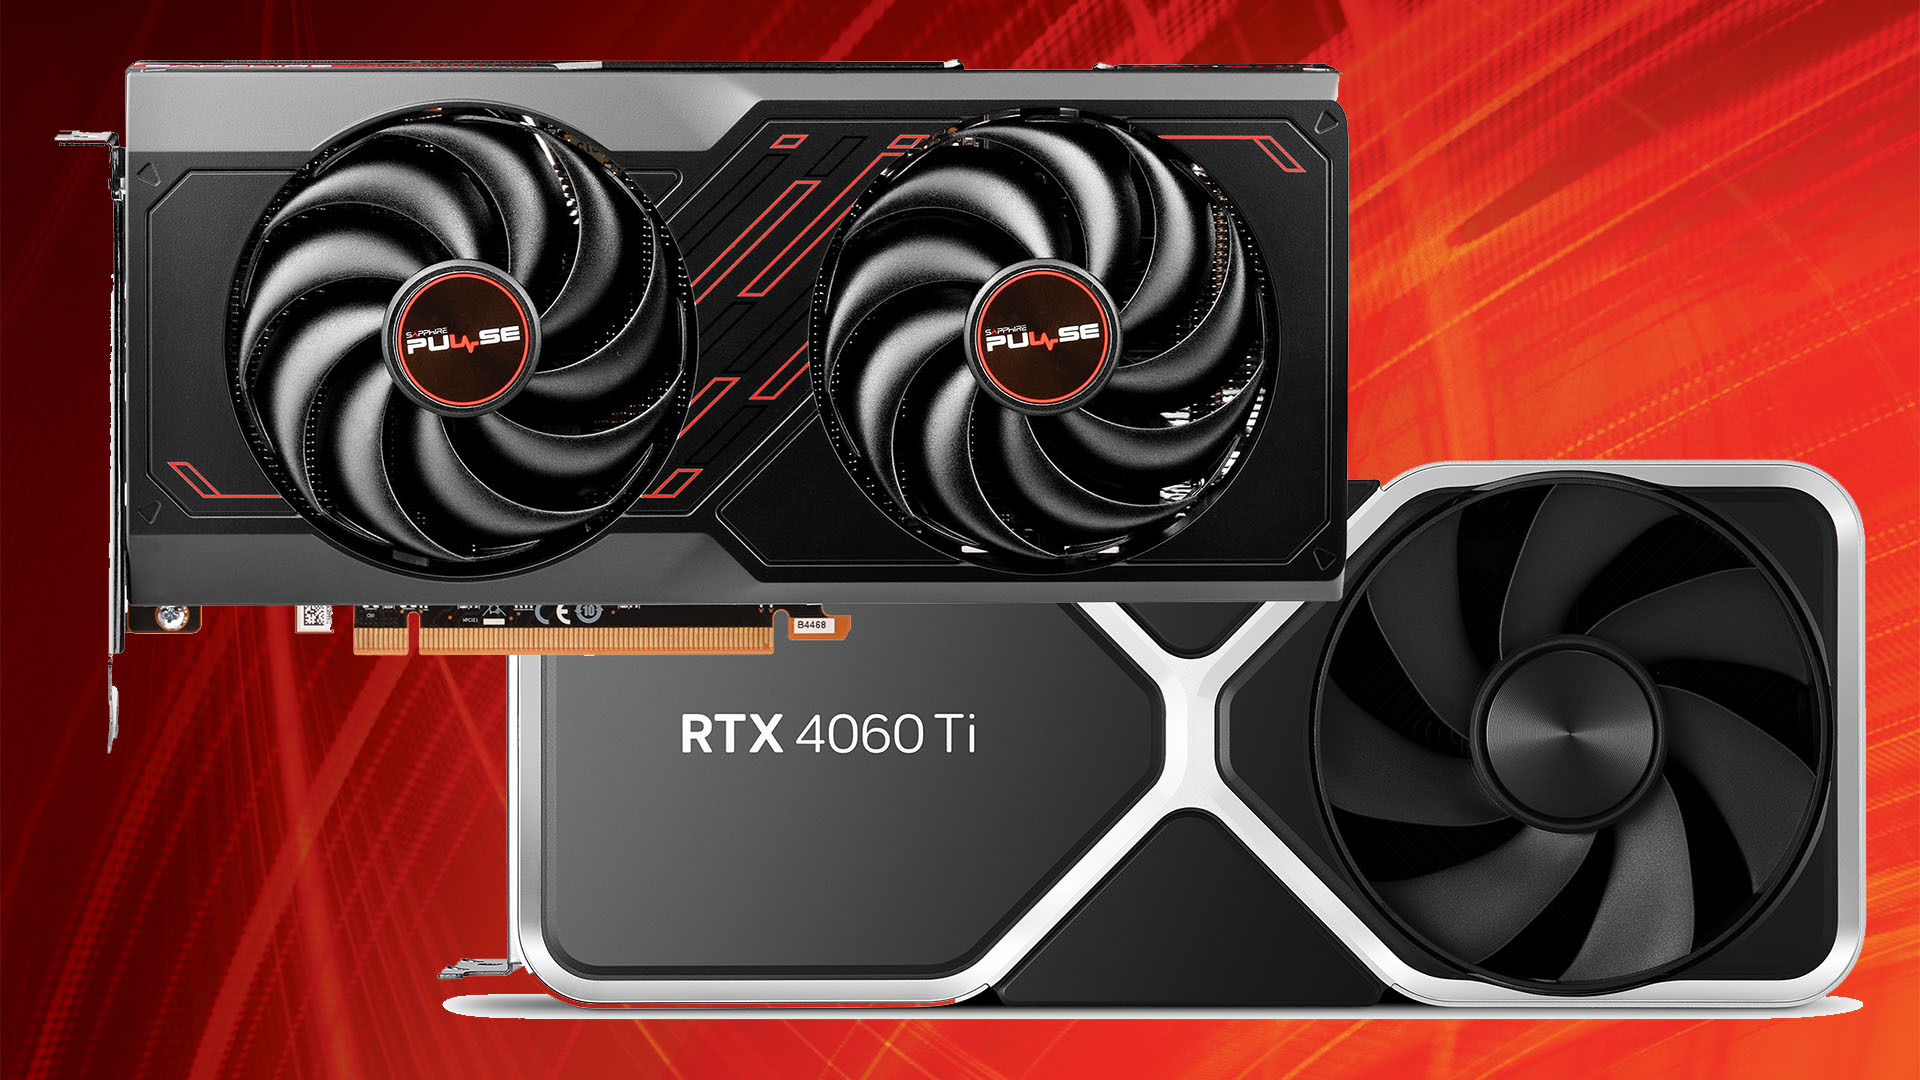 AMD Radeon RX 7600 XT review – more VRAM but not much else